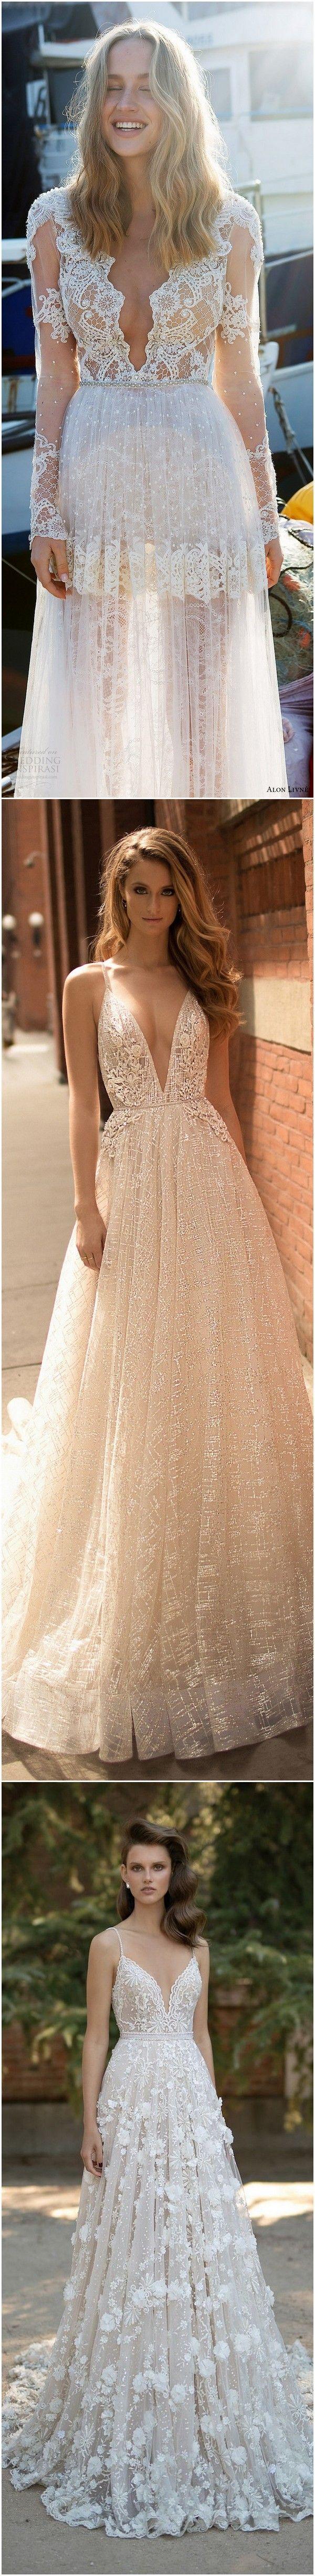 Hochzeit - Top 20 Vintage Wedding Dresses For 2017 Trends - Page 4 Of 4